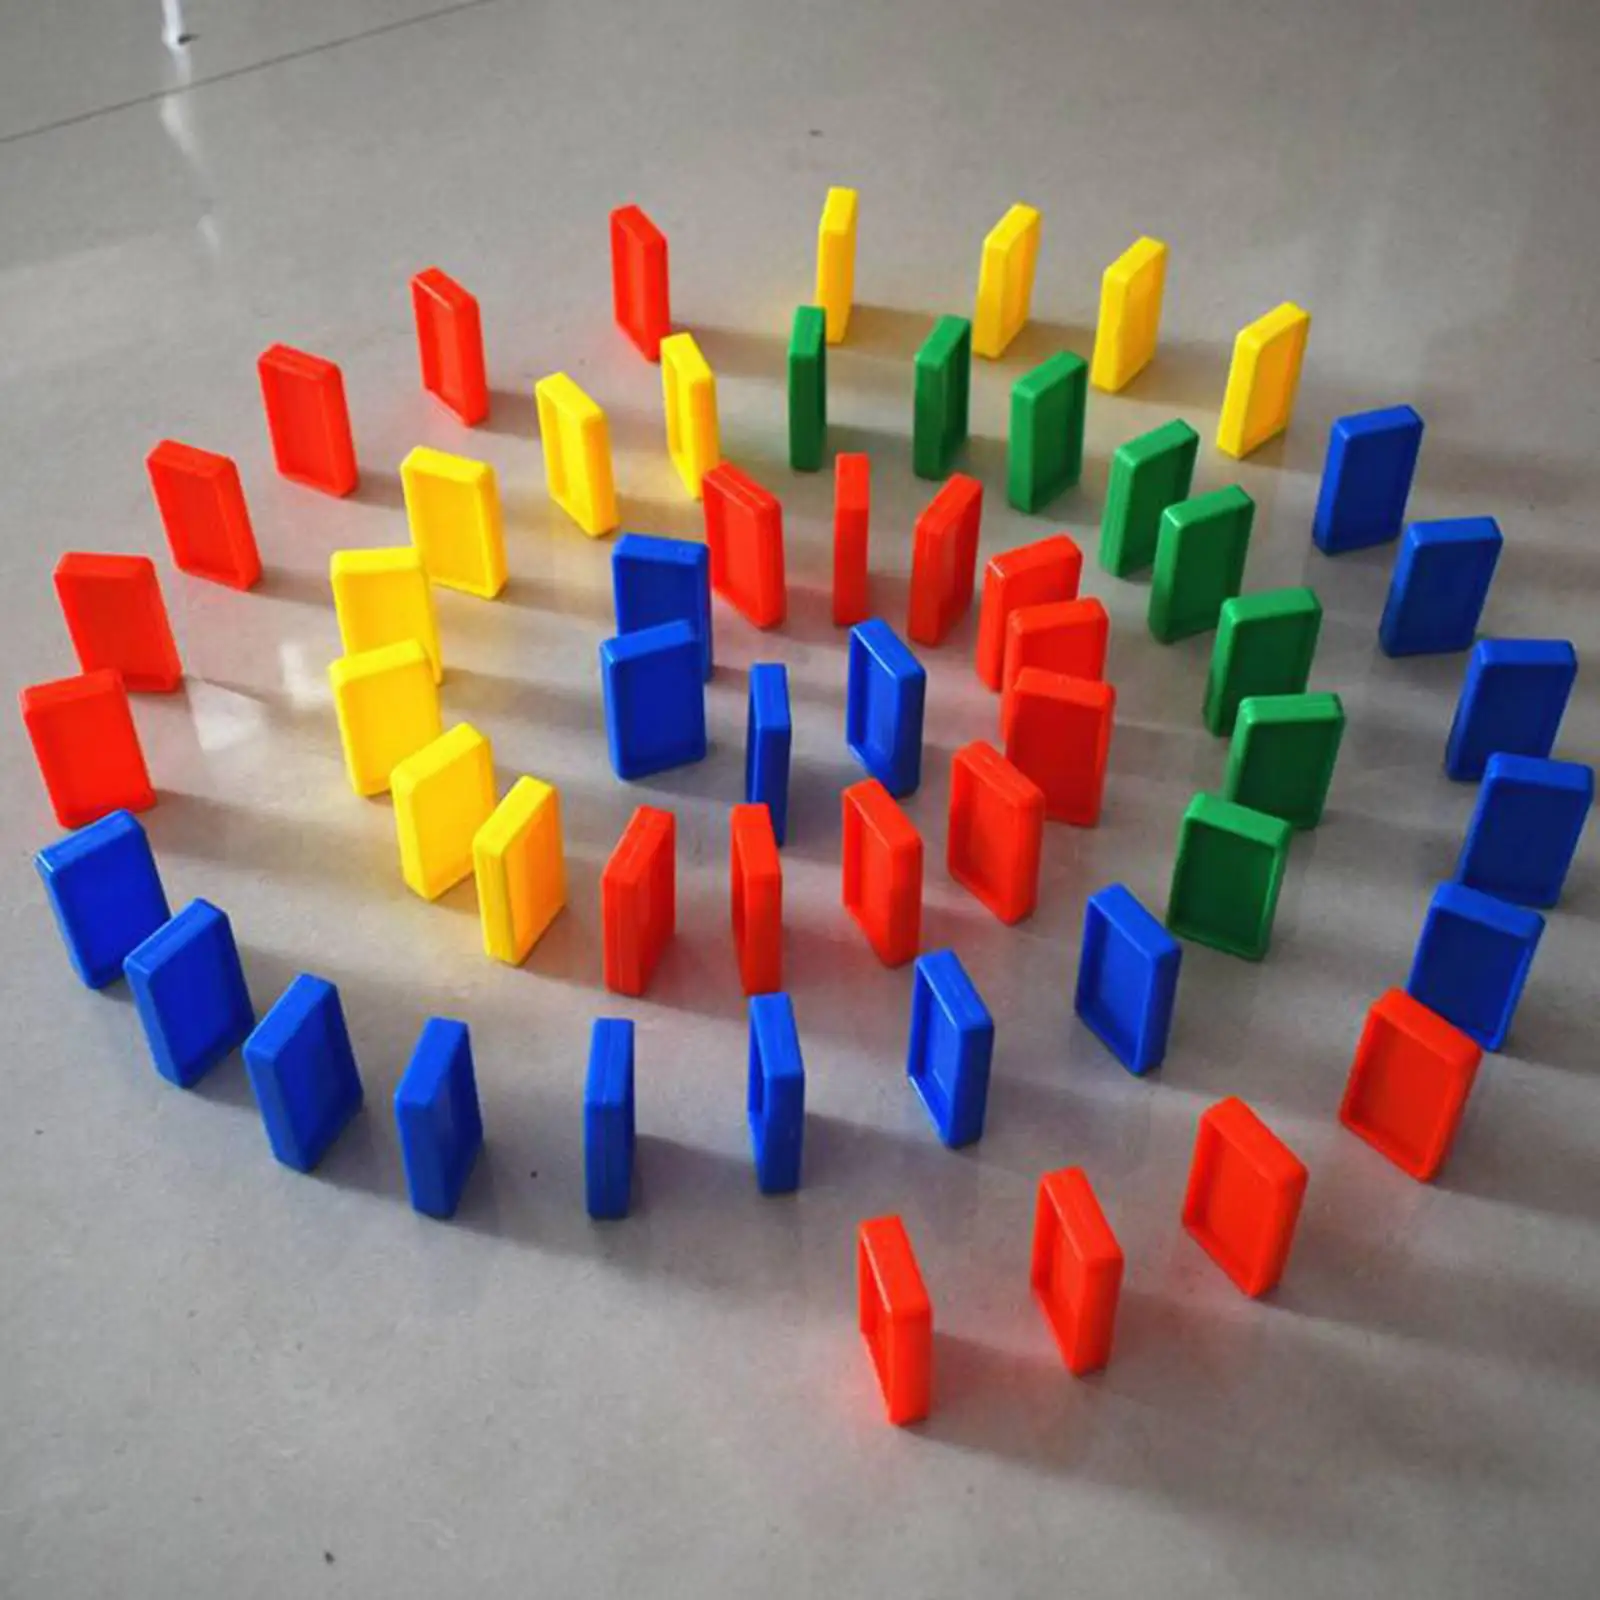 100Pcs Colorful Dominoes Blocks Stacking Toy Educational Play Game Family Games for Toddler Children Birthday Gifts